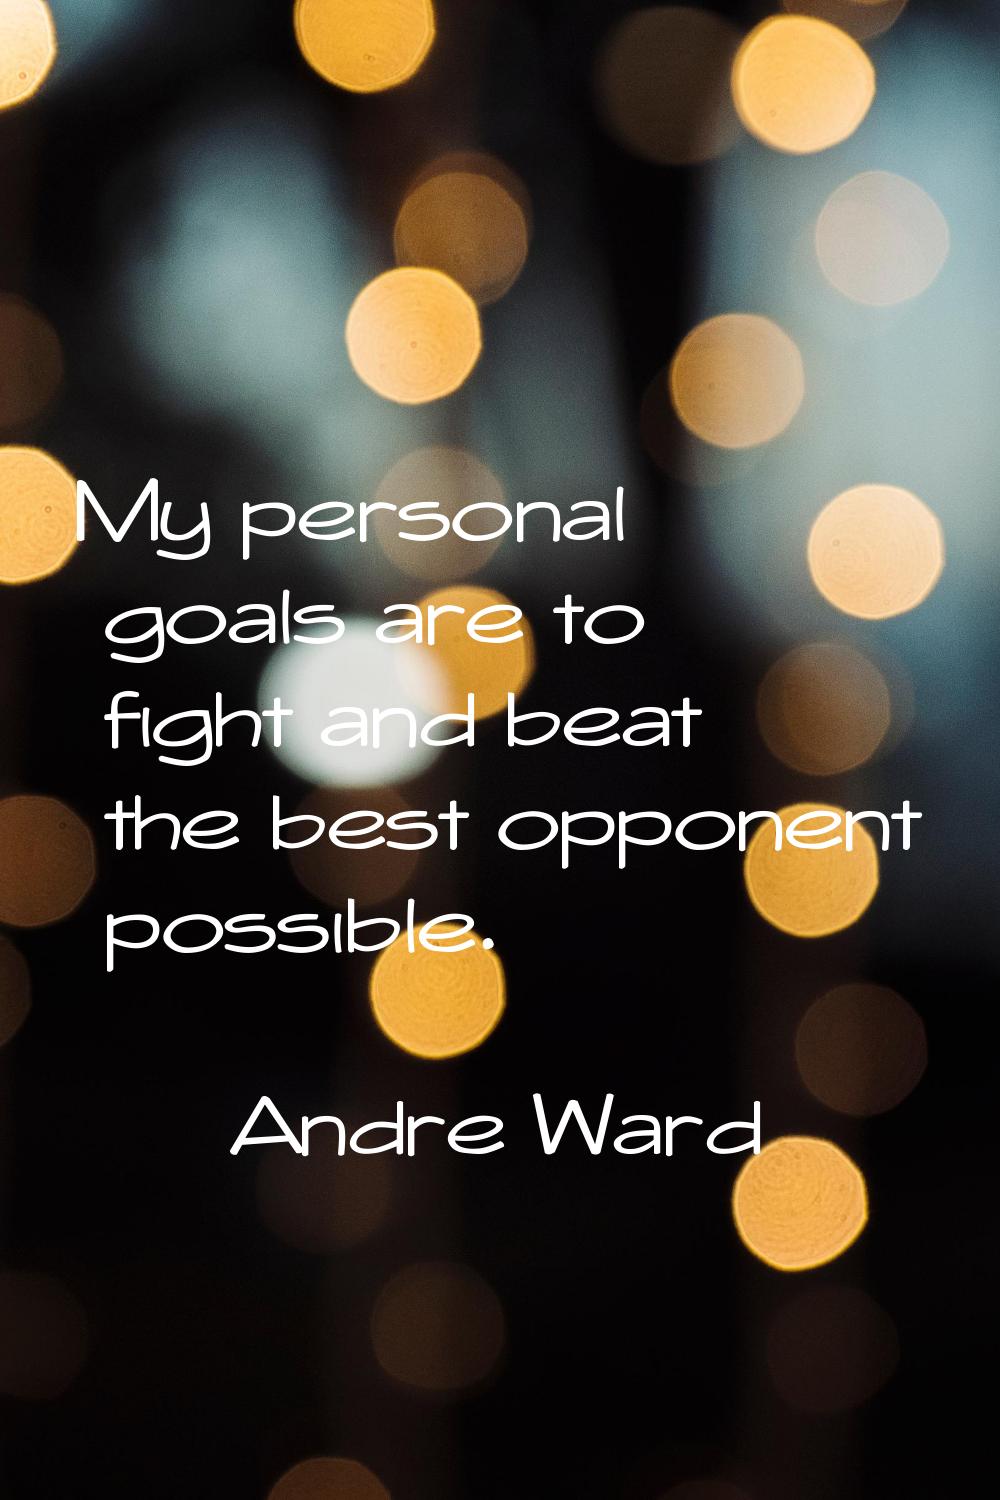 My personal goals are to fight and beat the best opponent possible.